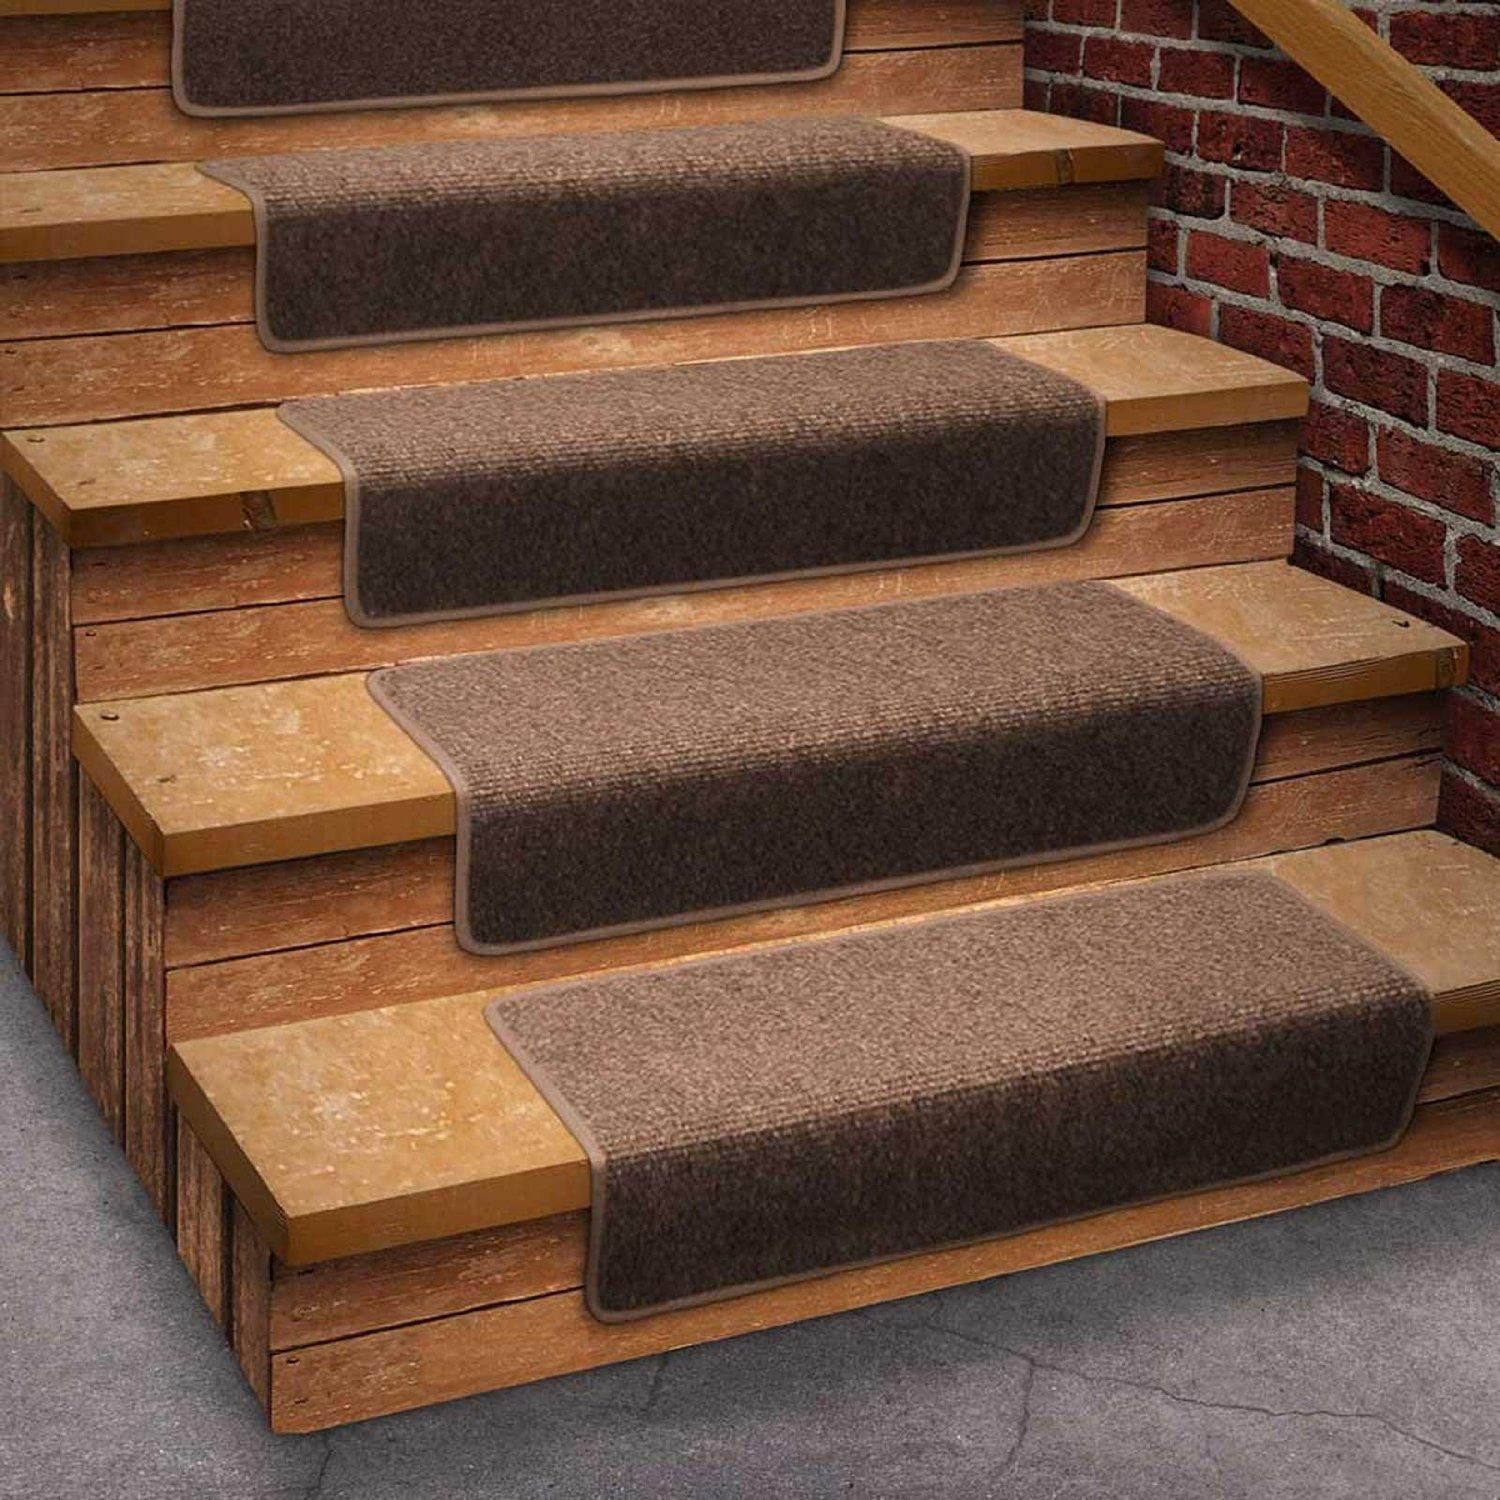 Using Carpet Stair Treads For Safety Reasons Vwho With Regard To Stair Tread Rug Liners (View 15 of 20)